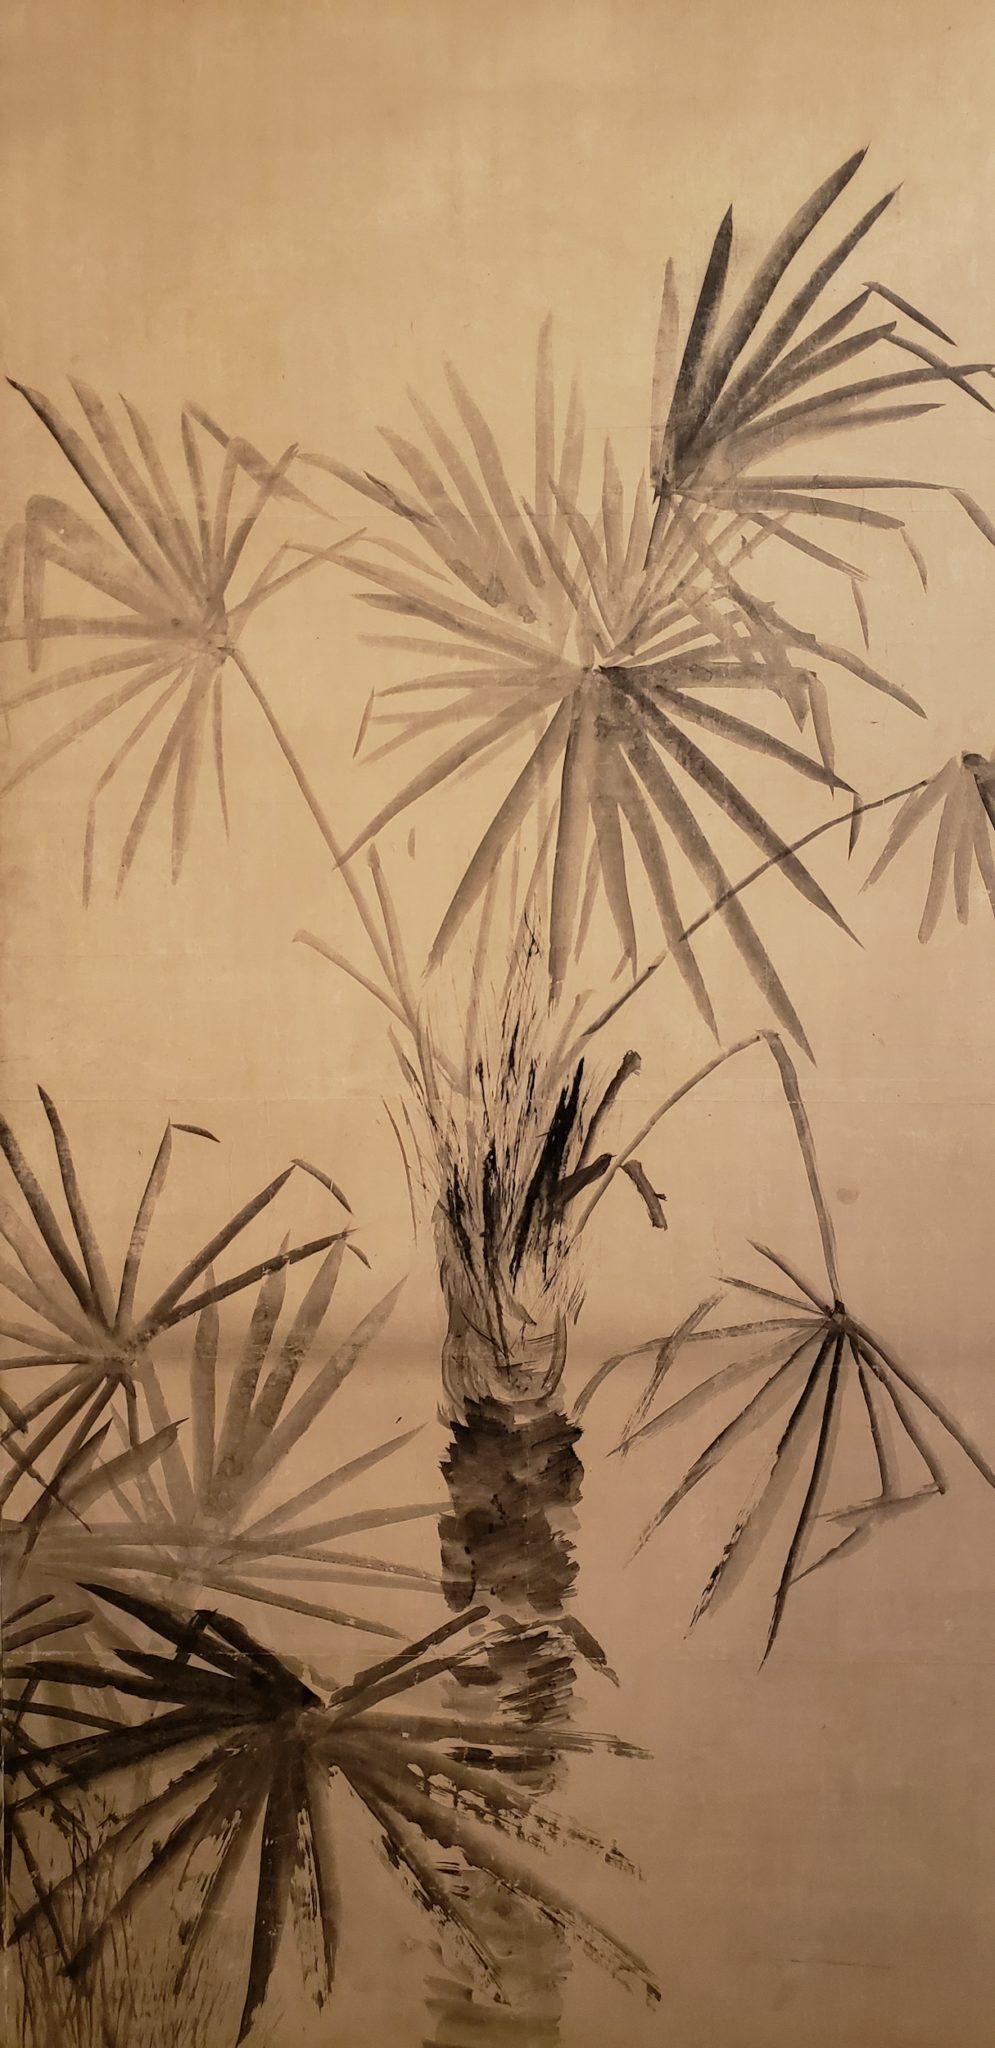 Japanese two-panel screen: ink painting of Palm Trees on paper, Edo period (1787) beautiful painting of Japanese windmill palm trees. Ink painting (sumi-e) on mulberry paper. Signature reads: Okyo. Pair available, sold separately.